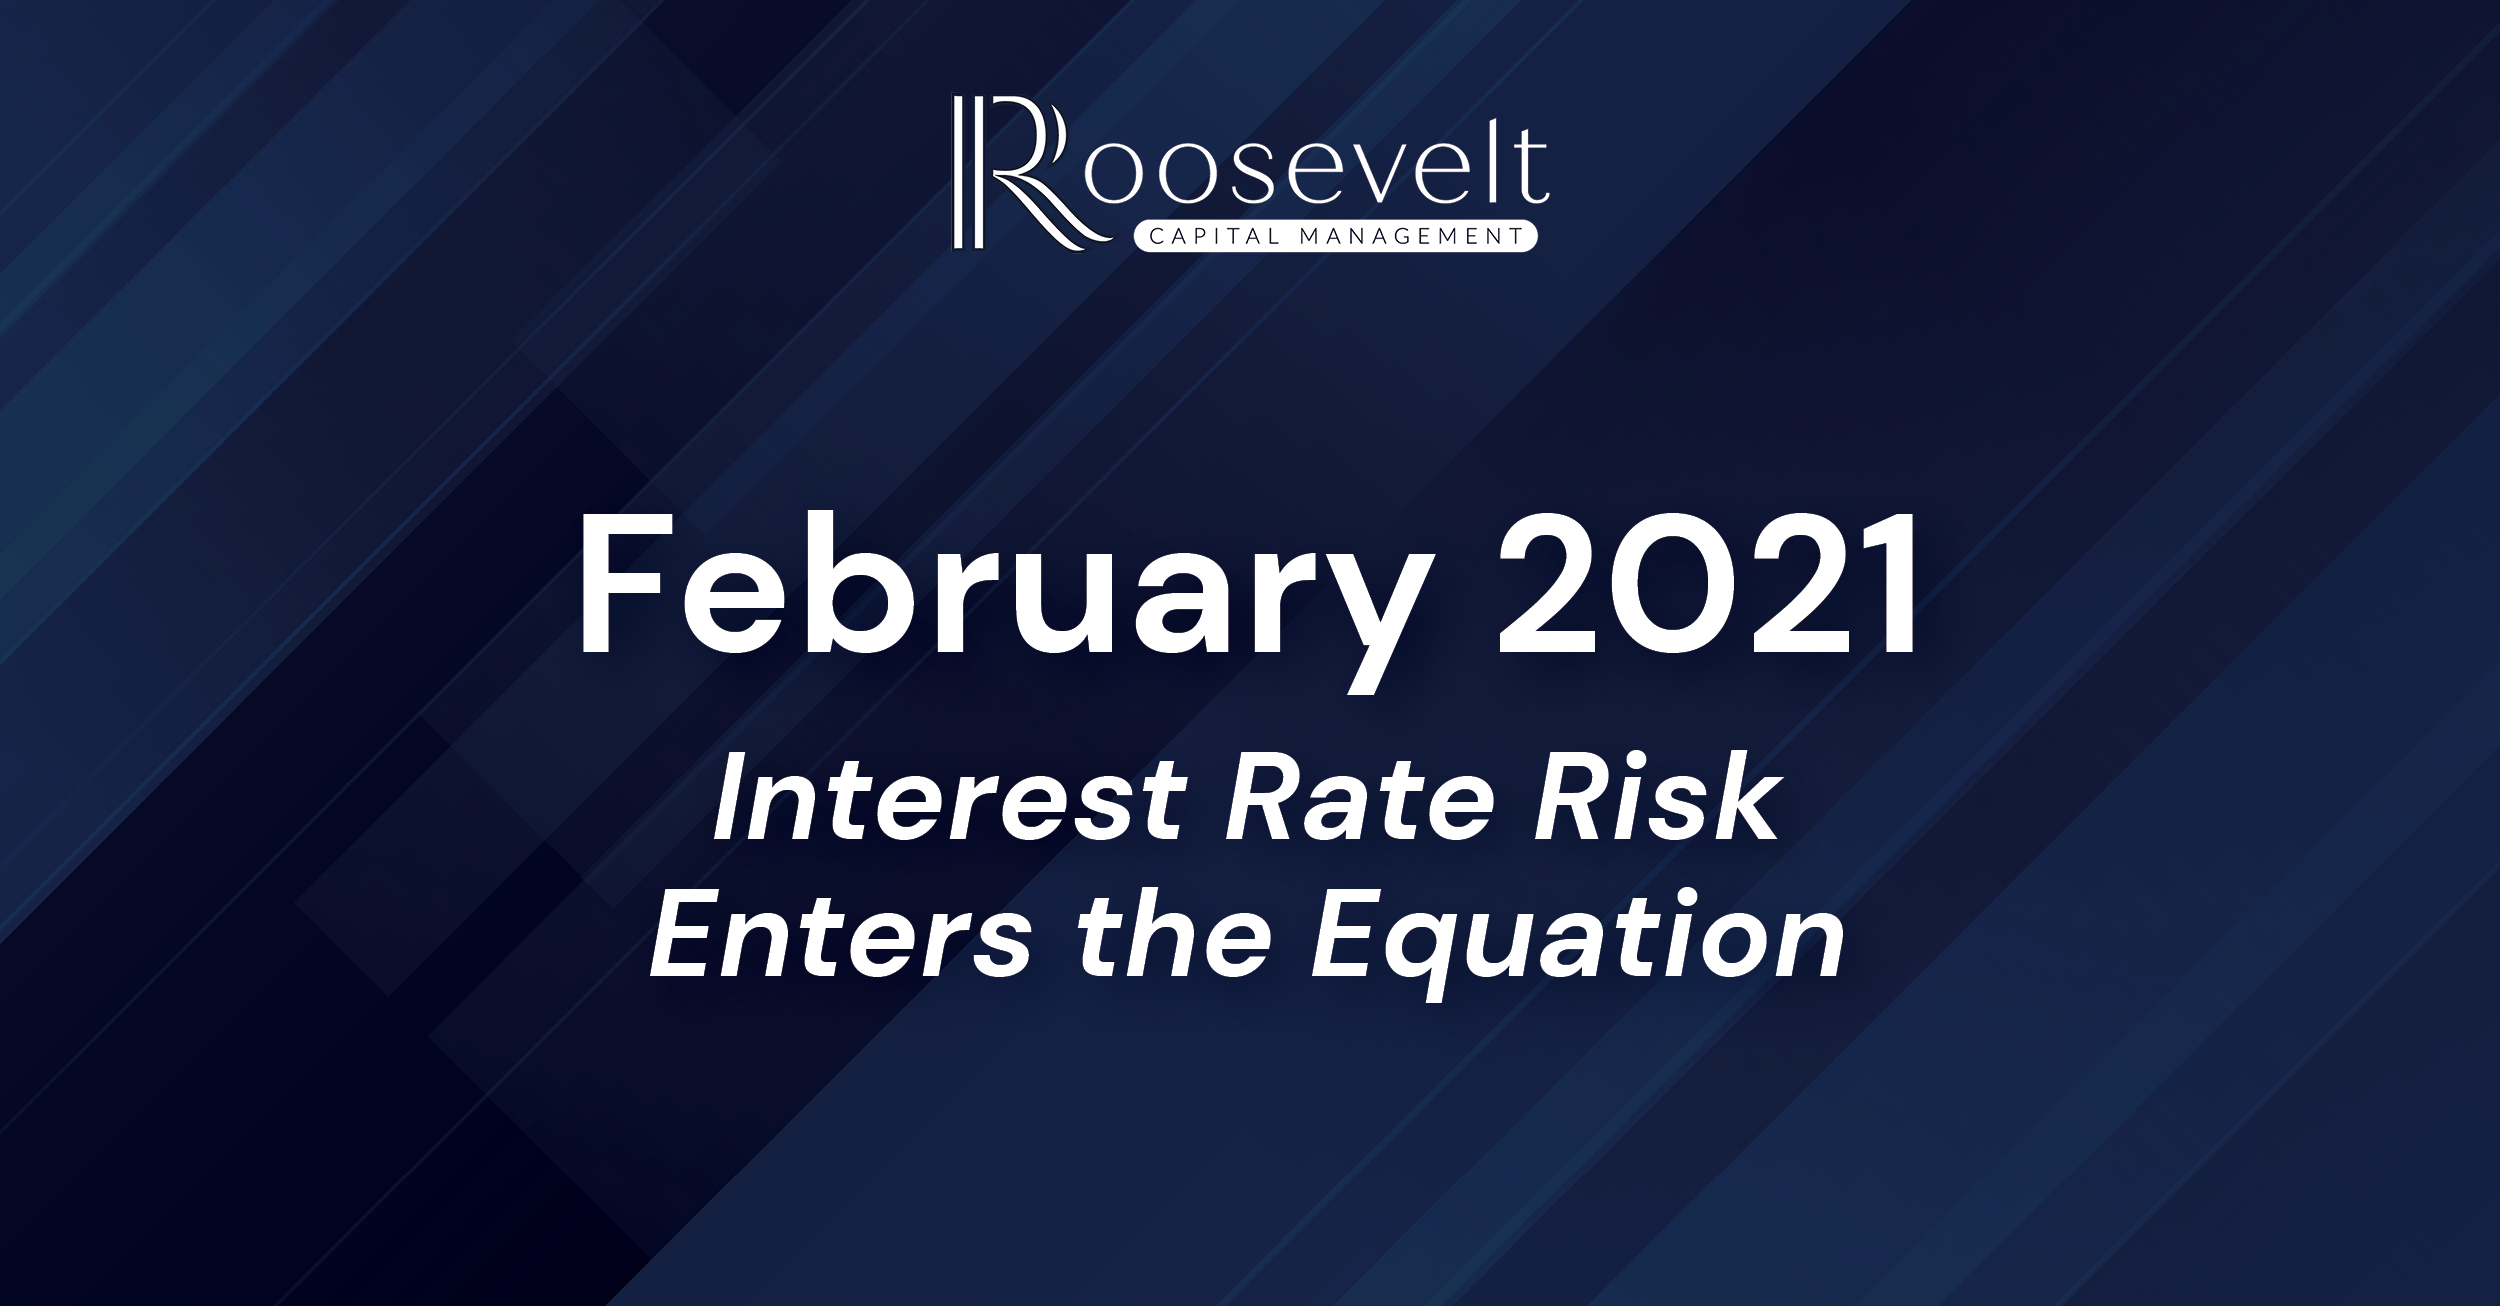 February 2021 - Interest Rate Risk Enters the Equation